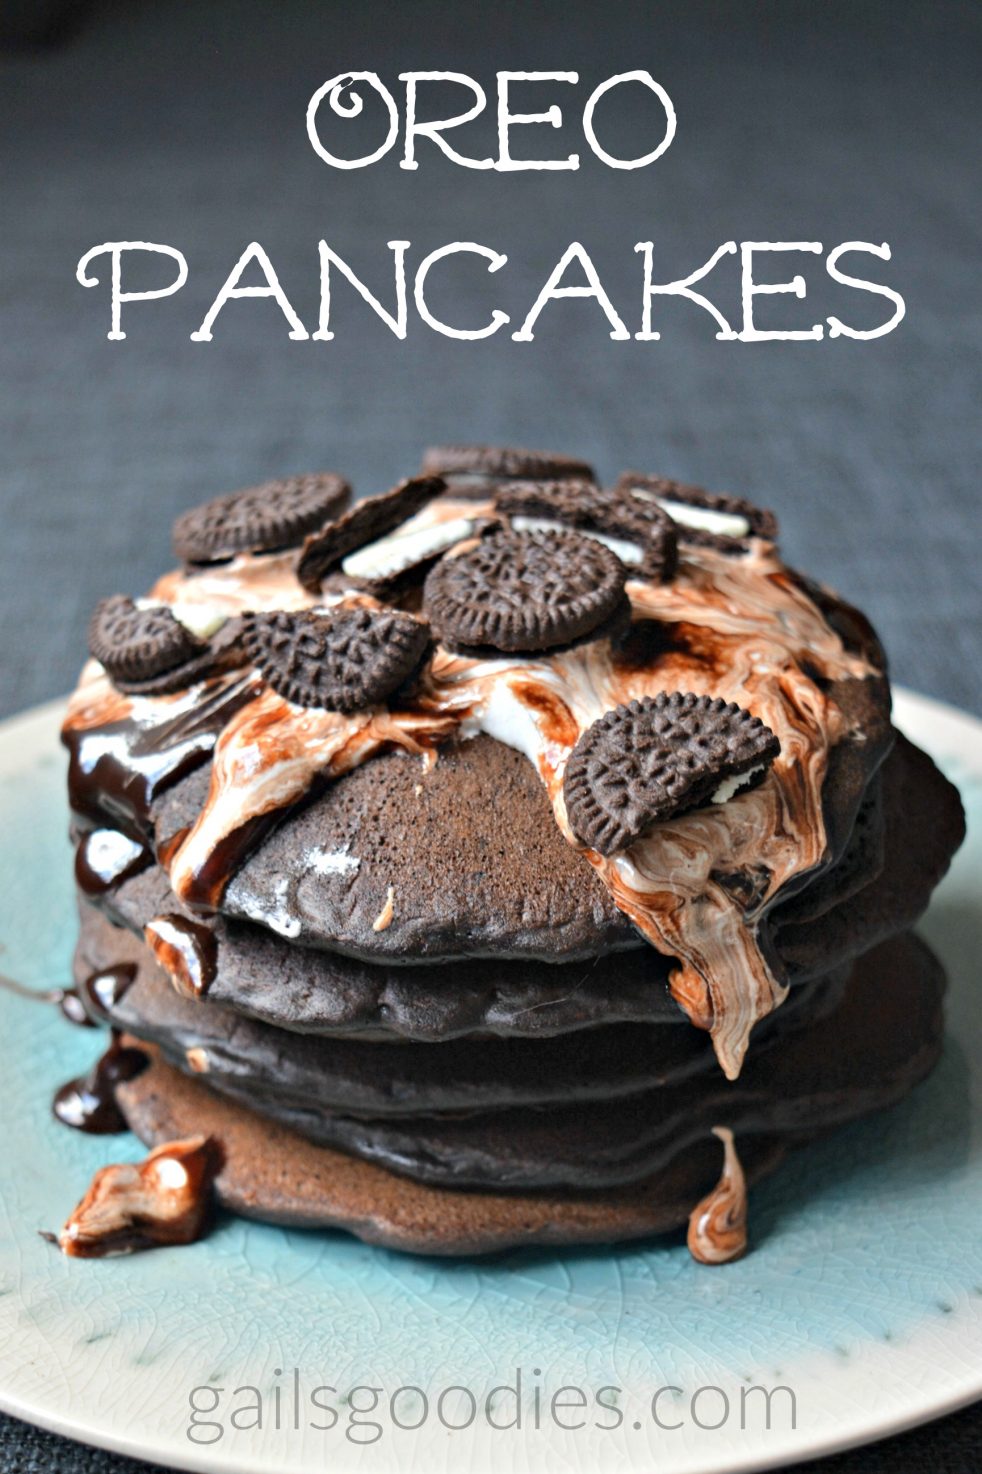 A stack of 5 black chocolate oreo pancakes sit on a teal plate. The pancakes are topped with marshmallow cream, fudge sauce and broken mini-oreos. The words "oreo pancakes" are at the top of the photo.